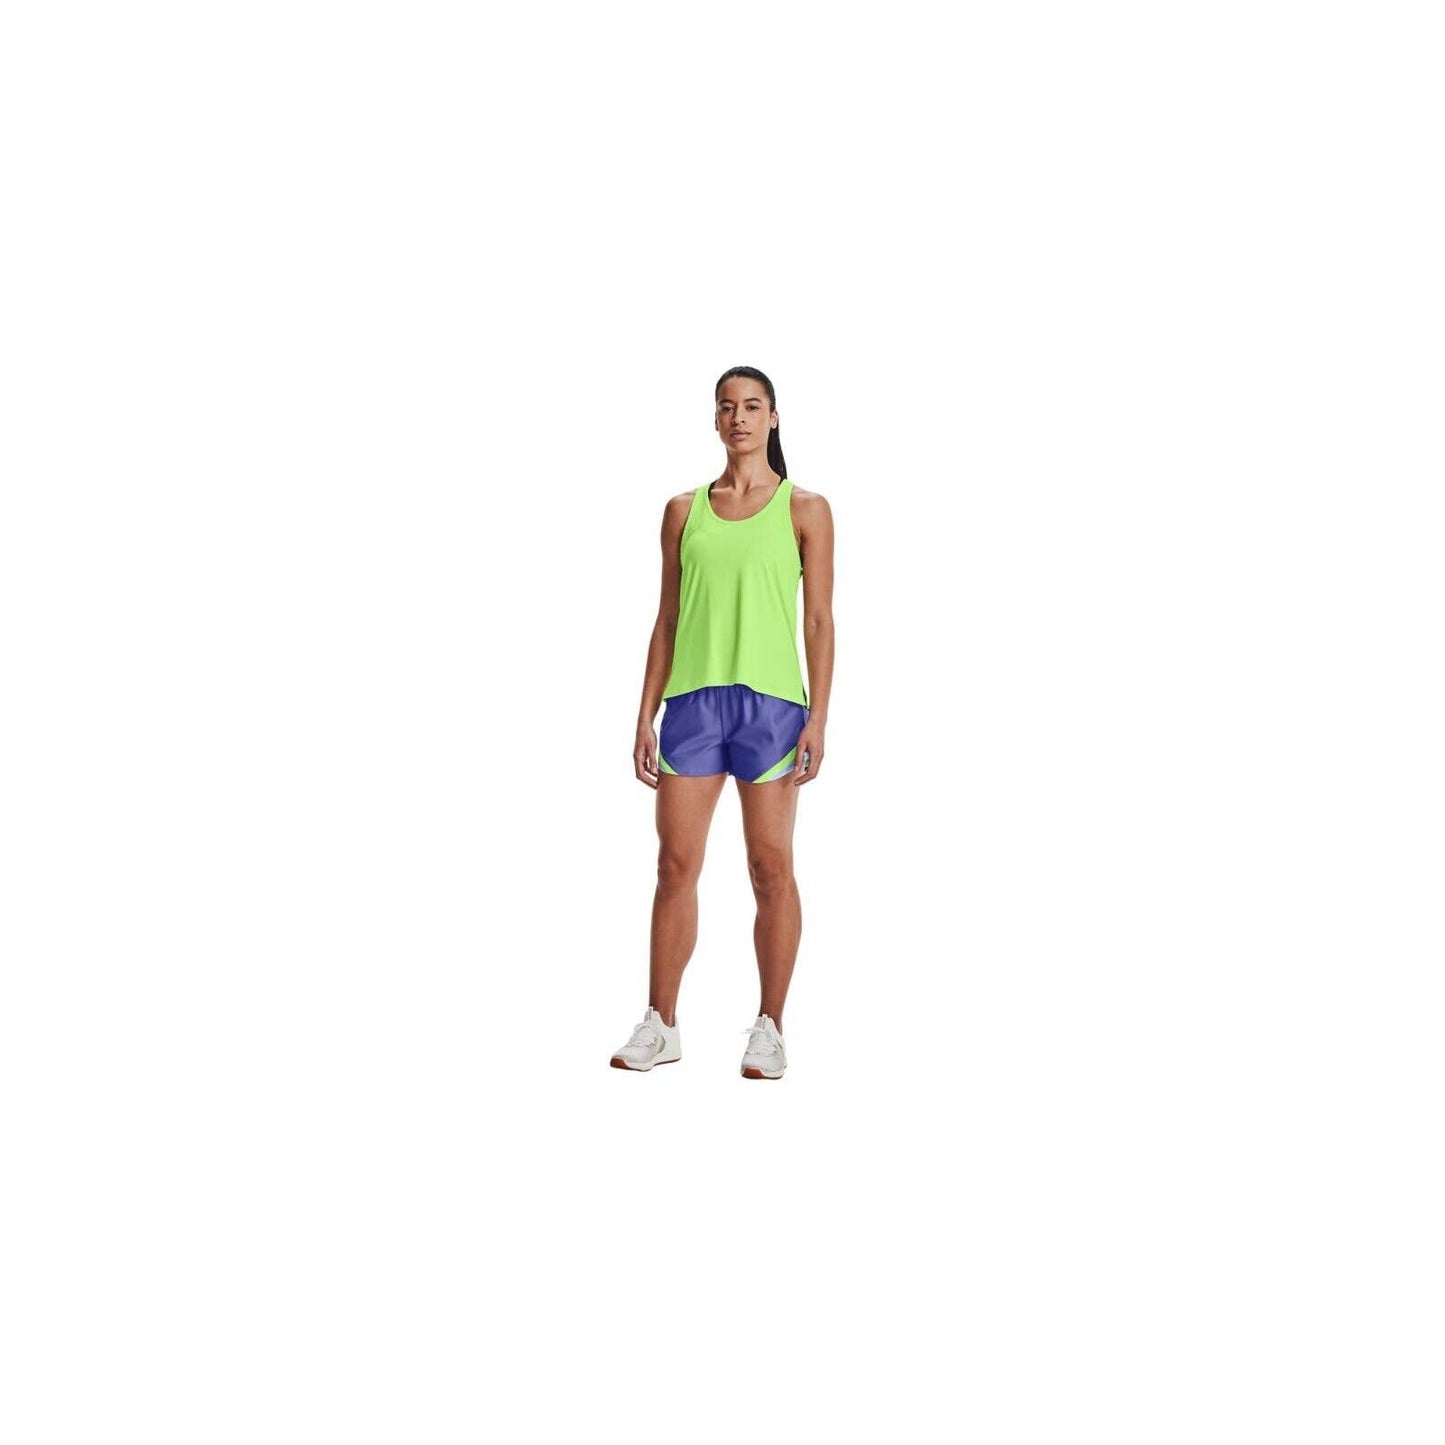 Under Armour Women's Play Up Shorts Starlight Periwinkle Summer Lime, NWT